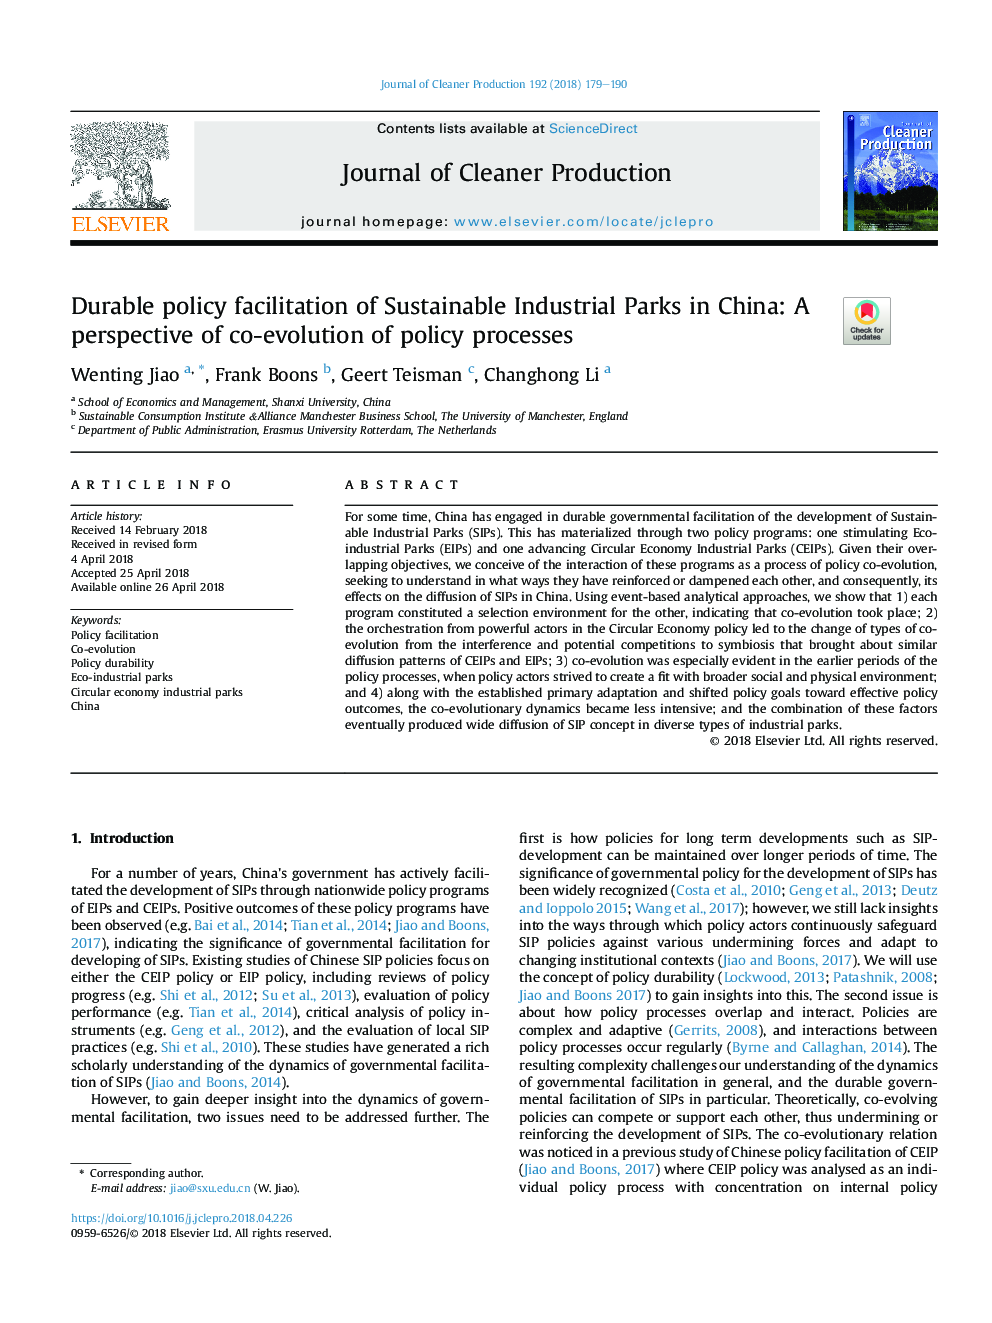 Durable policy facilitation of Sustainable Industrial Parks in China: A perspective of co-evolution of policy processes